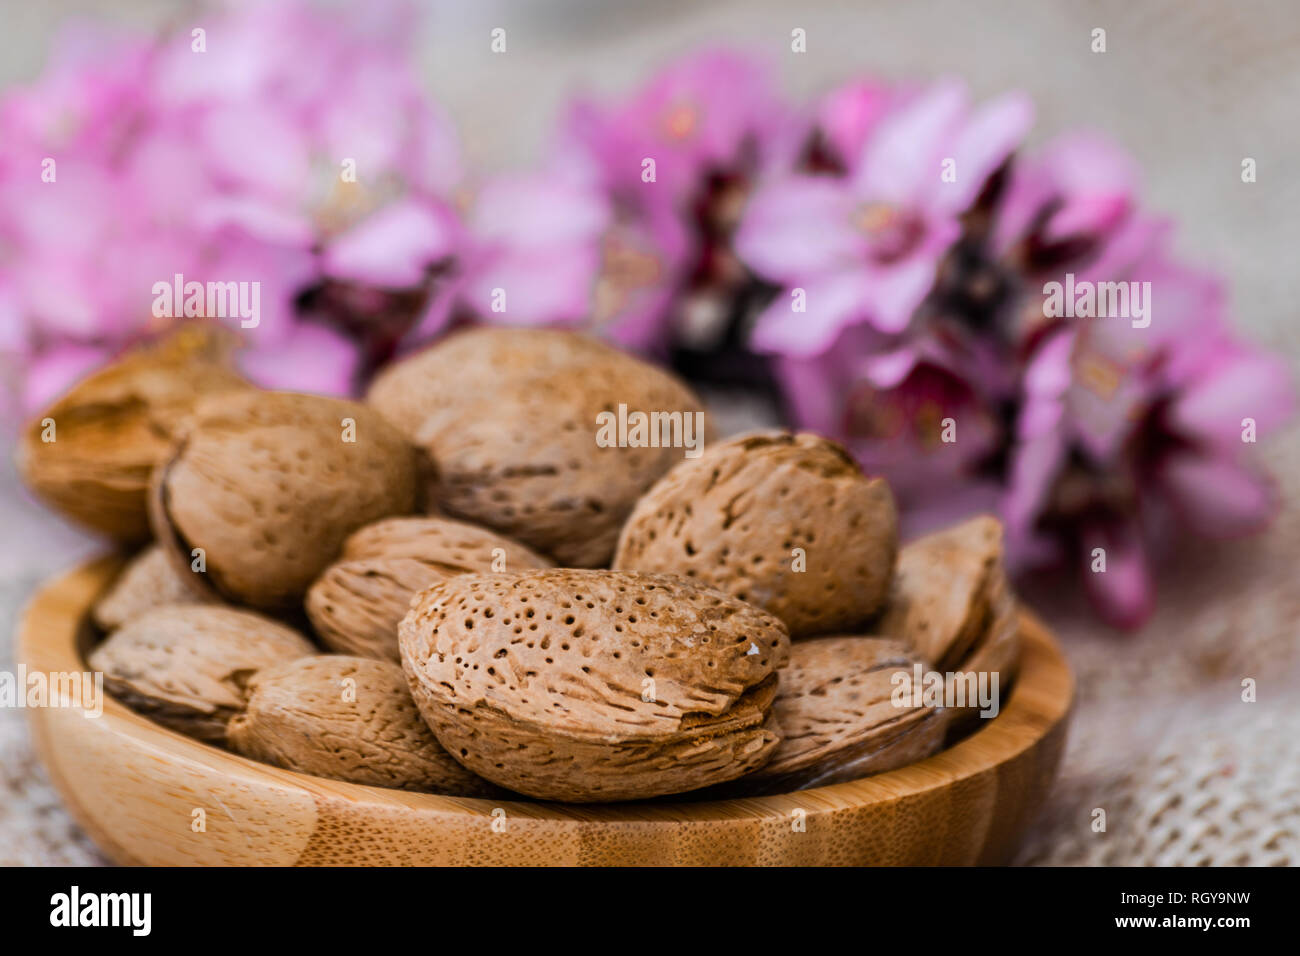 Almonds with shell in wooden bowl, with almond flowers blooming background Stock Photo